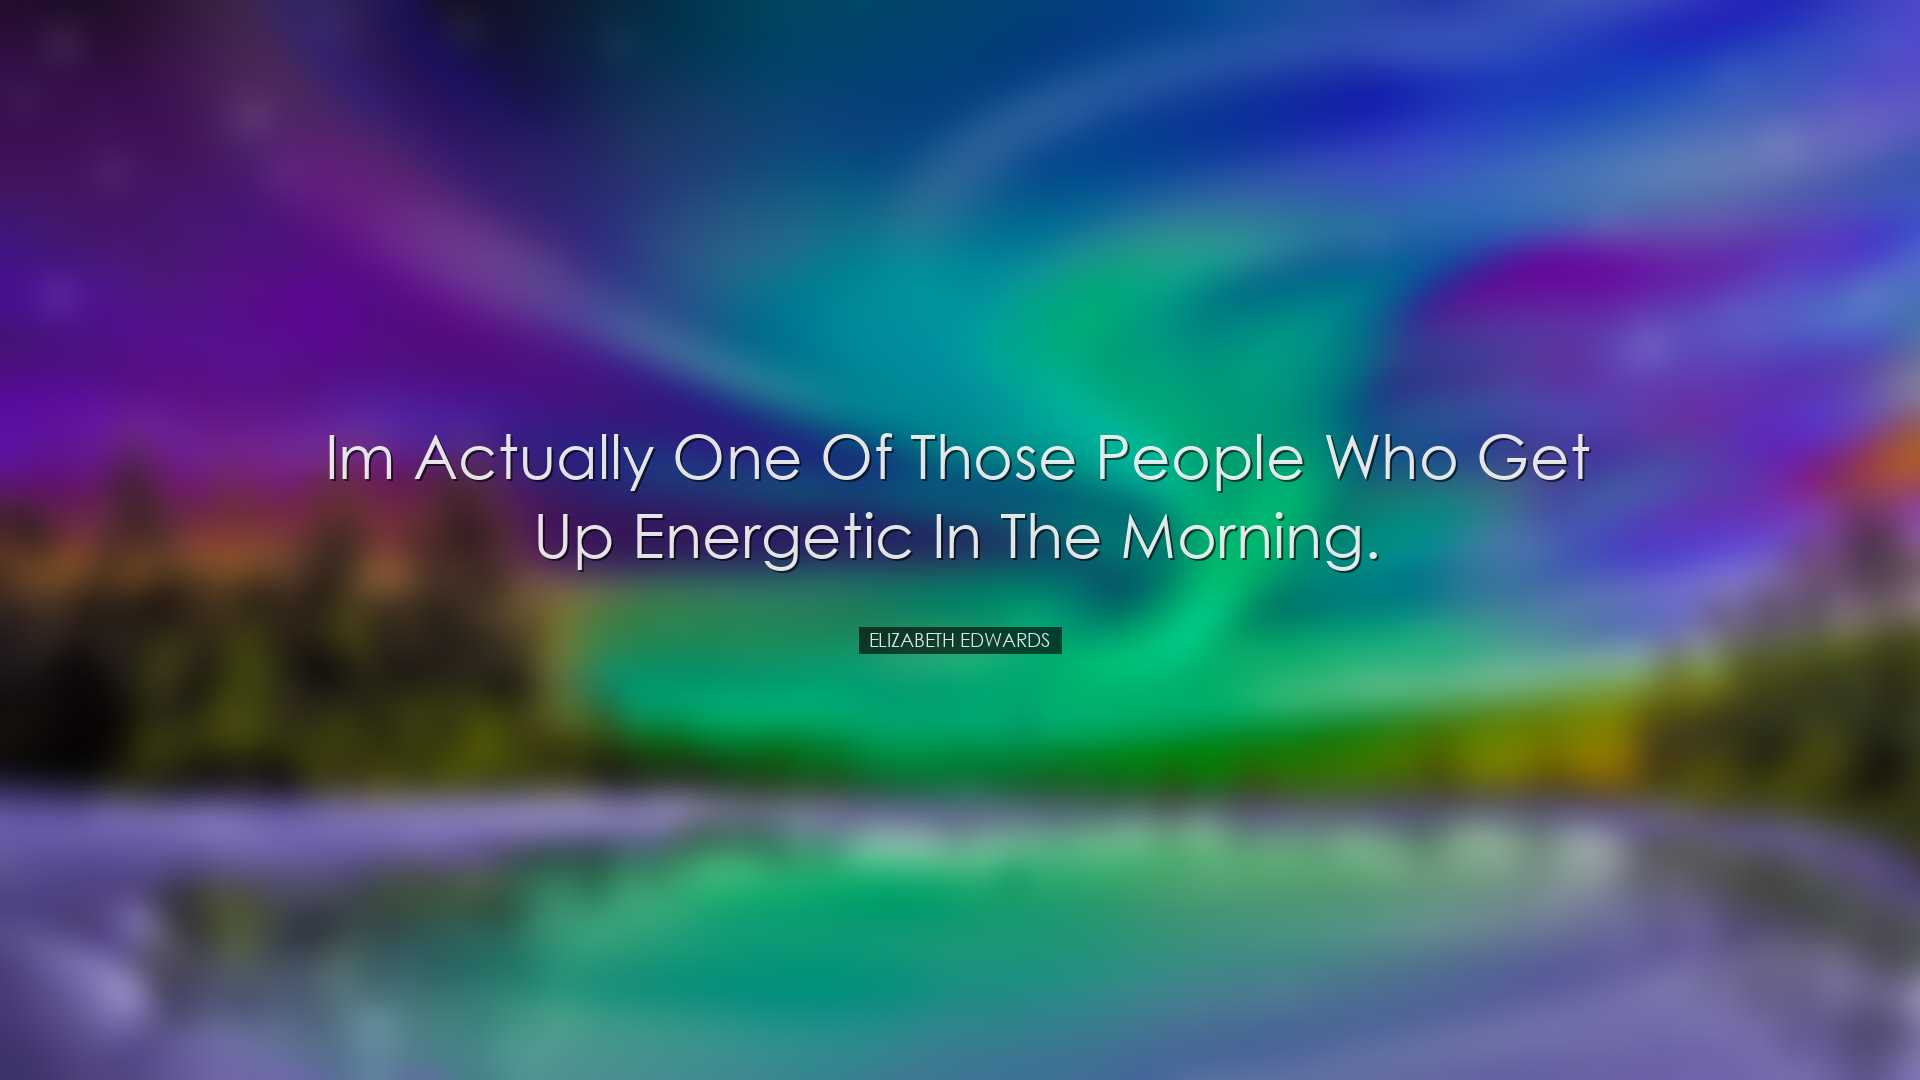 Im actually one of those people who get up energetic in the mornin